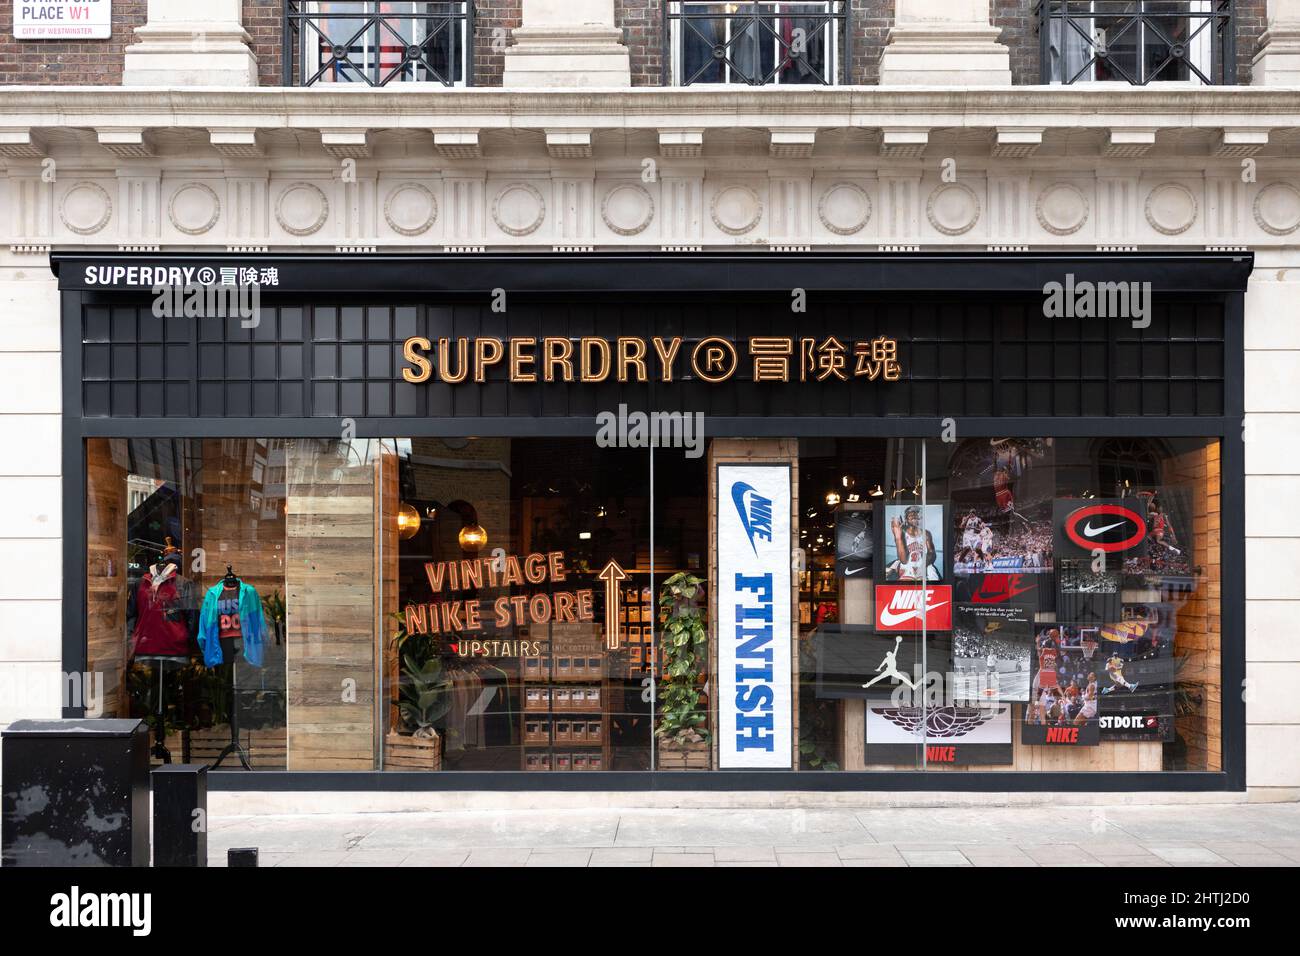 Superdry store on Oxford Street, West End London Stock Photo - Alamy